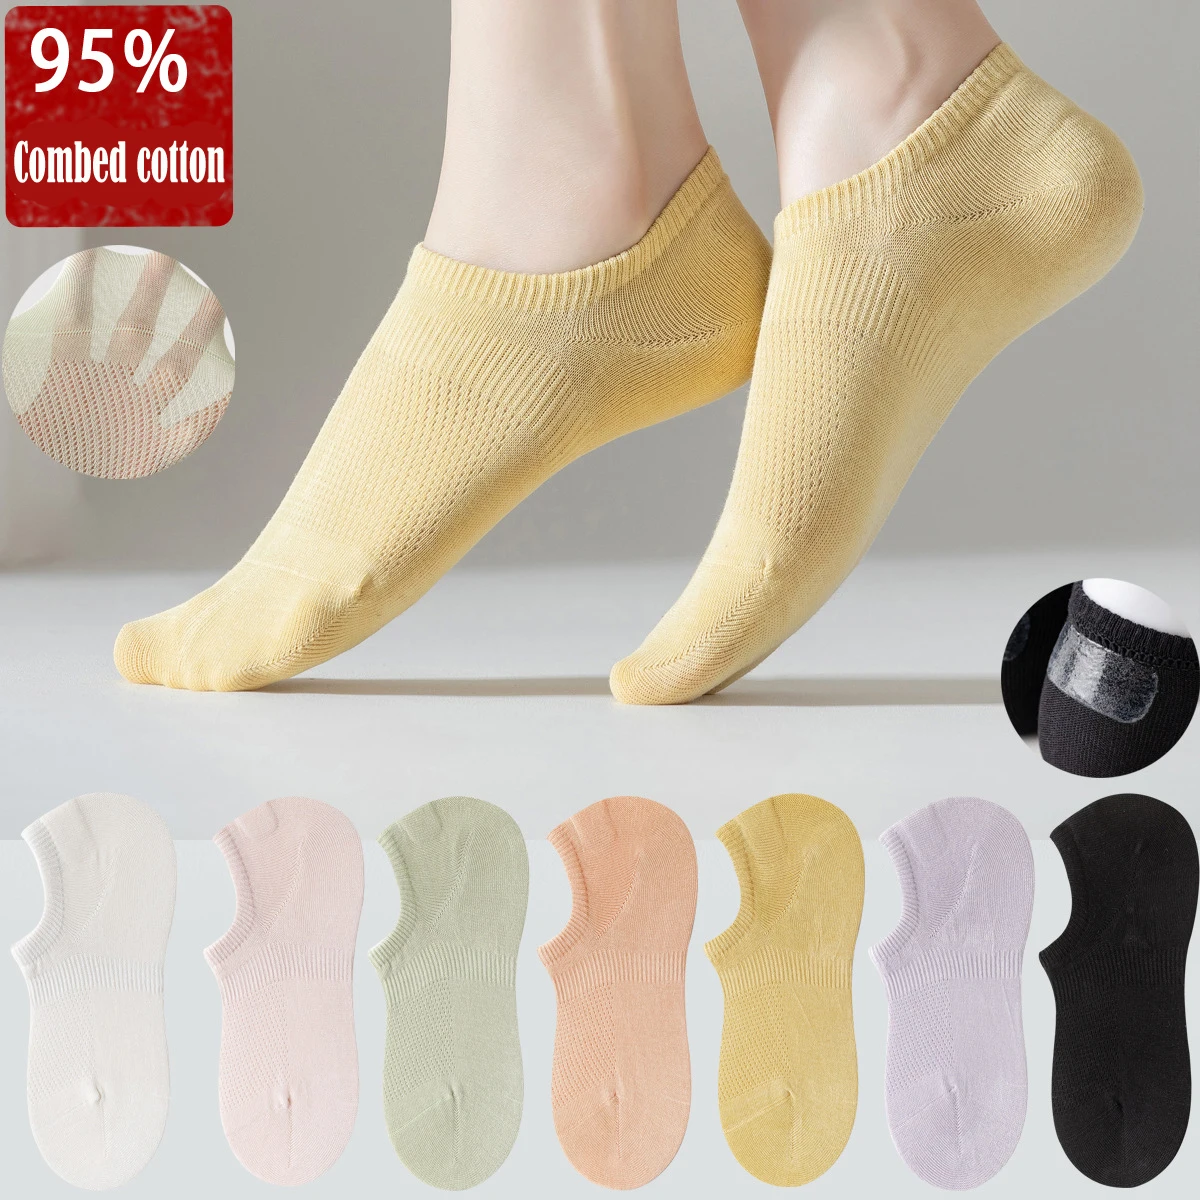 

5 Pairs Women's Invisible Socks Combed Cotton Silicone Non-slip Summer No-show Girls Ankle Socks Casual Breathable Thin Boat Sox